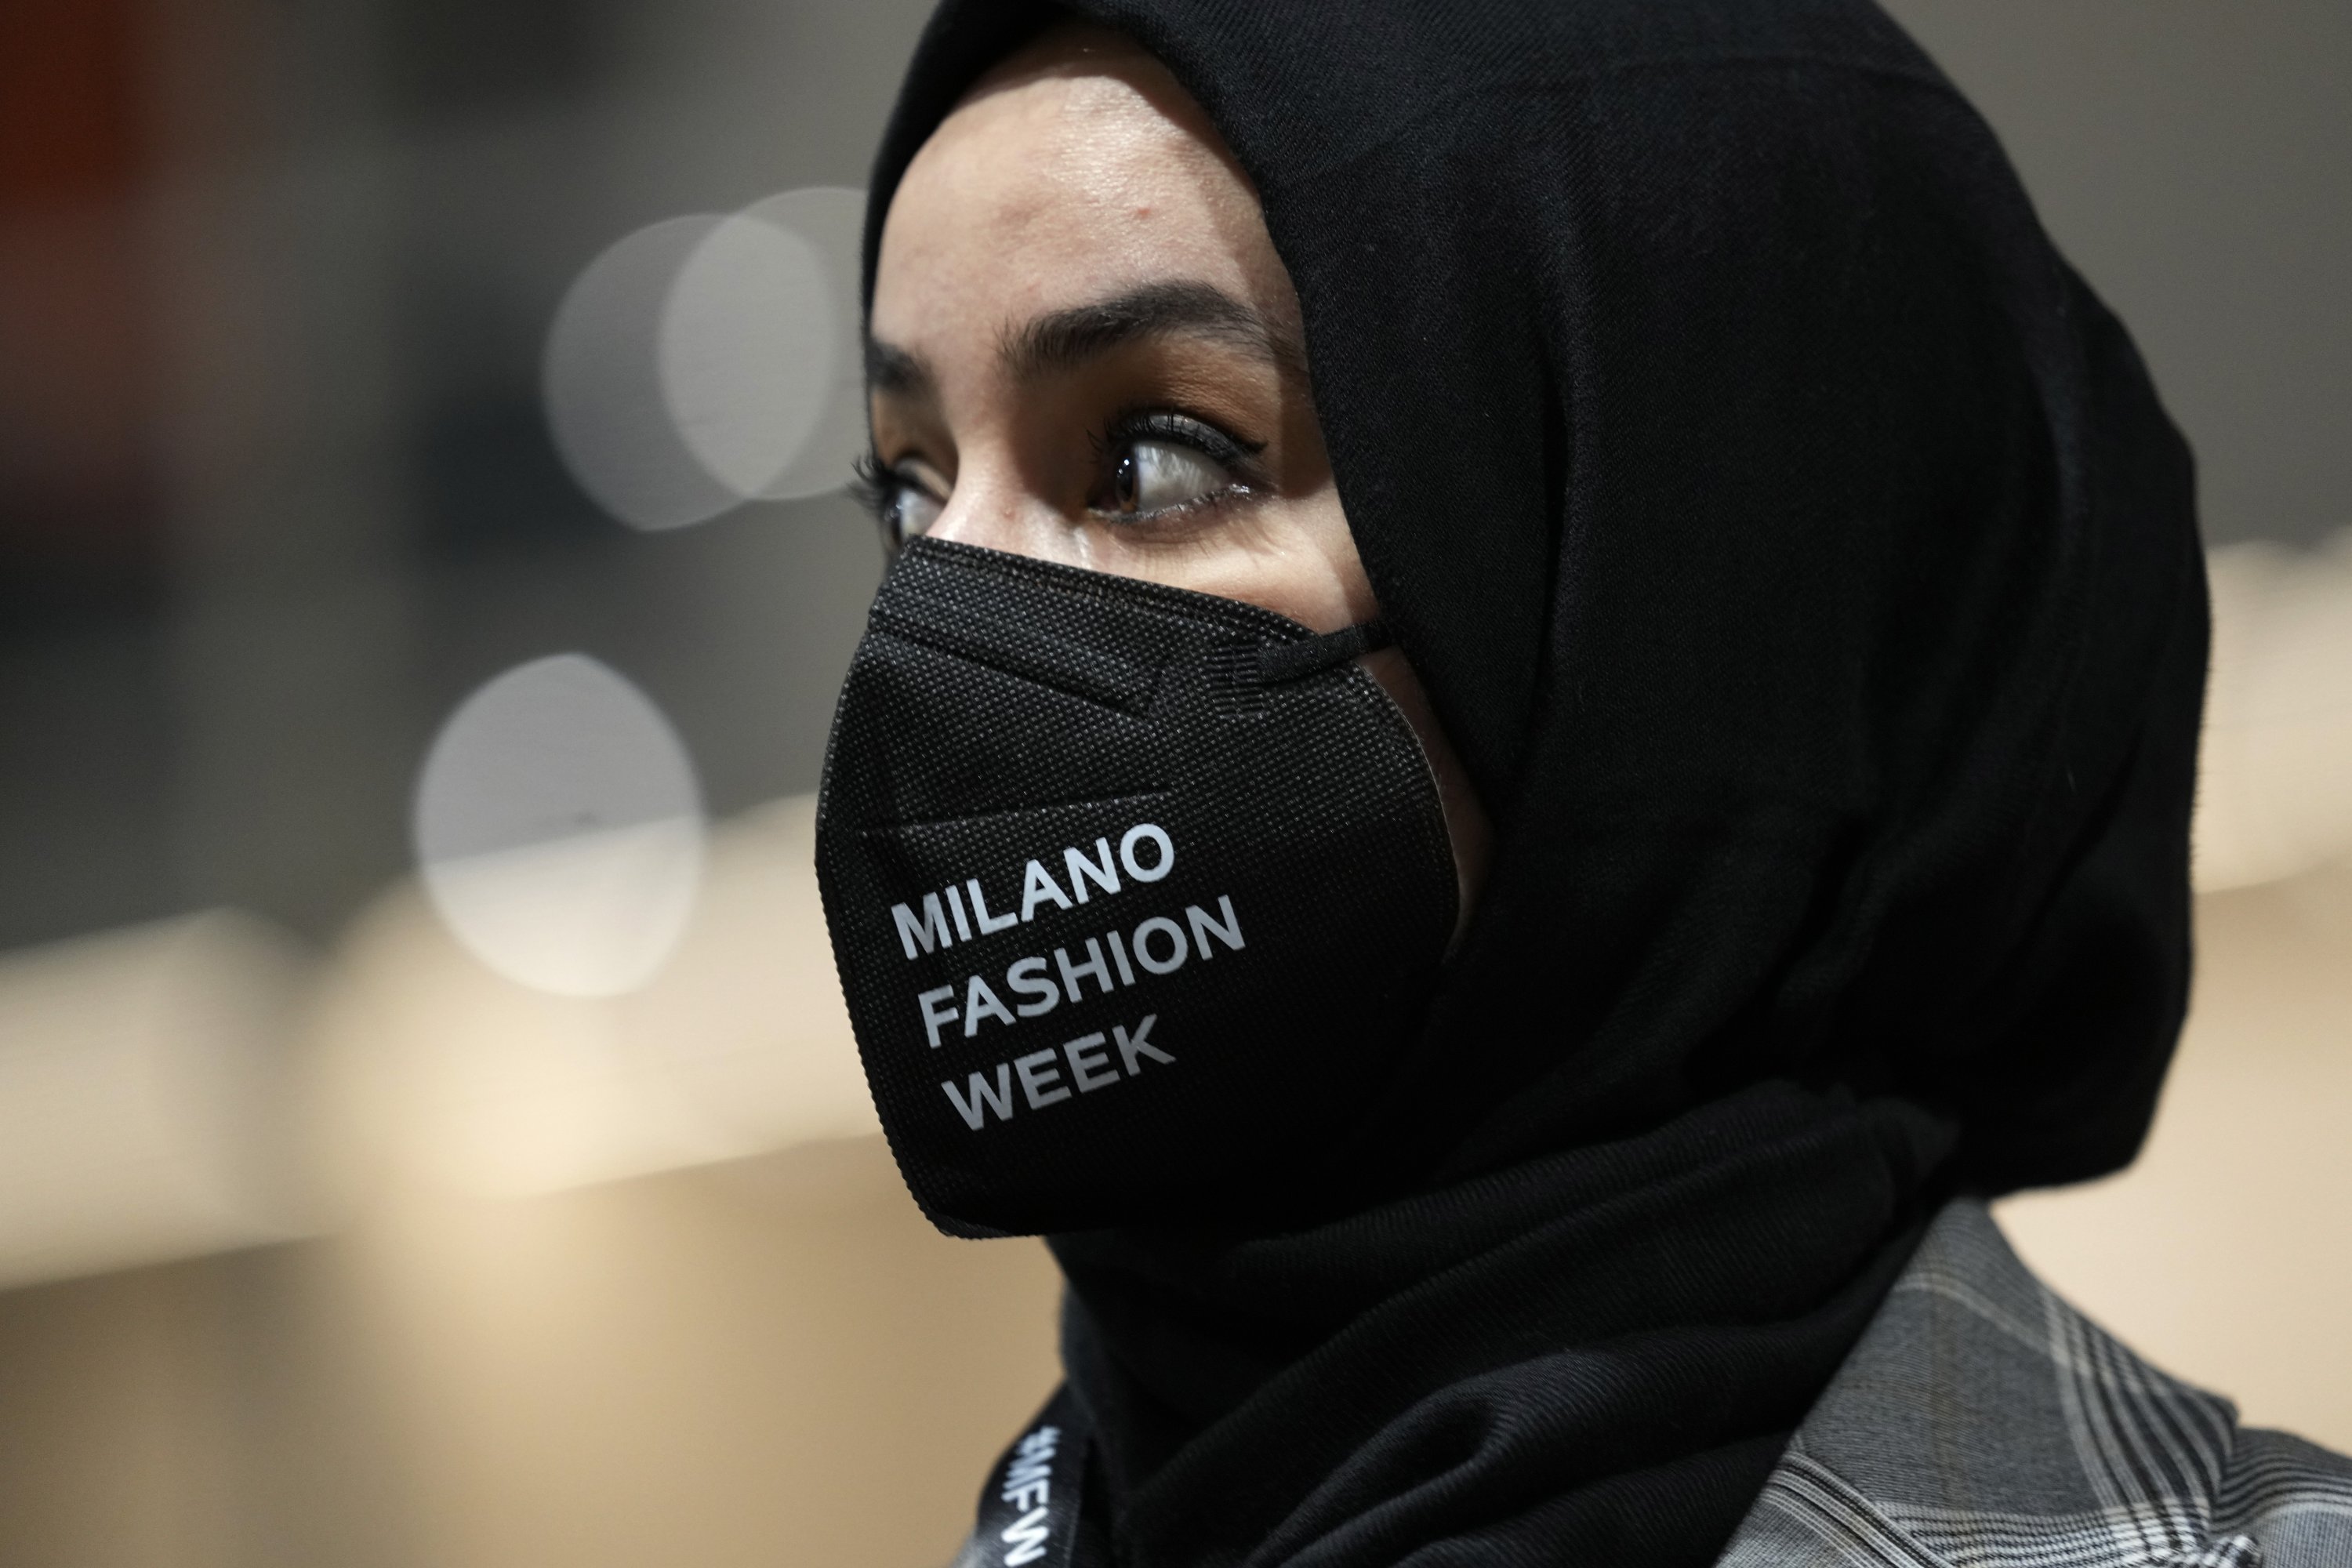 Fashion designer Zineb Hazim, from Morocco, stands next to her creations as part of the We Are Made in Italy Spring Summer 2022 collective fashion event, unveiled during the Milan Fashion Week, Italy, Feb. 22, 2022. (AP Photo)